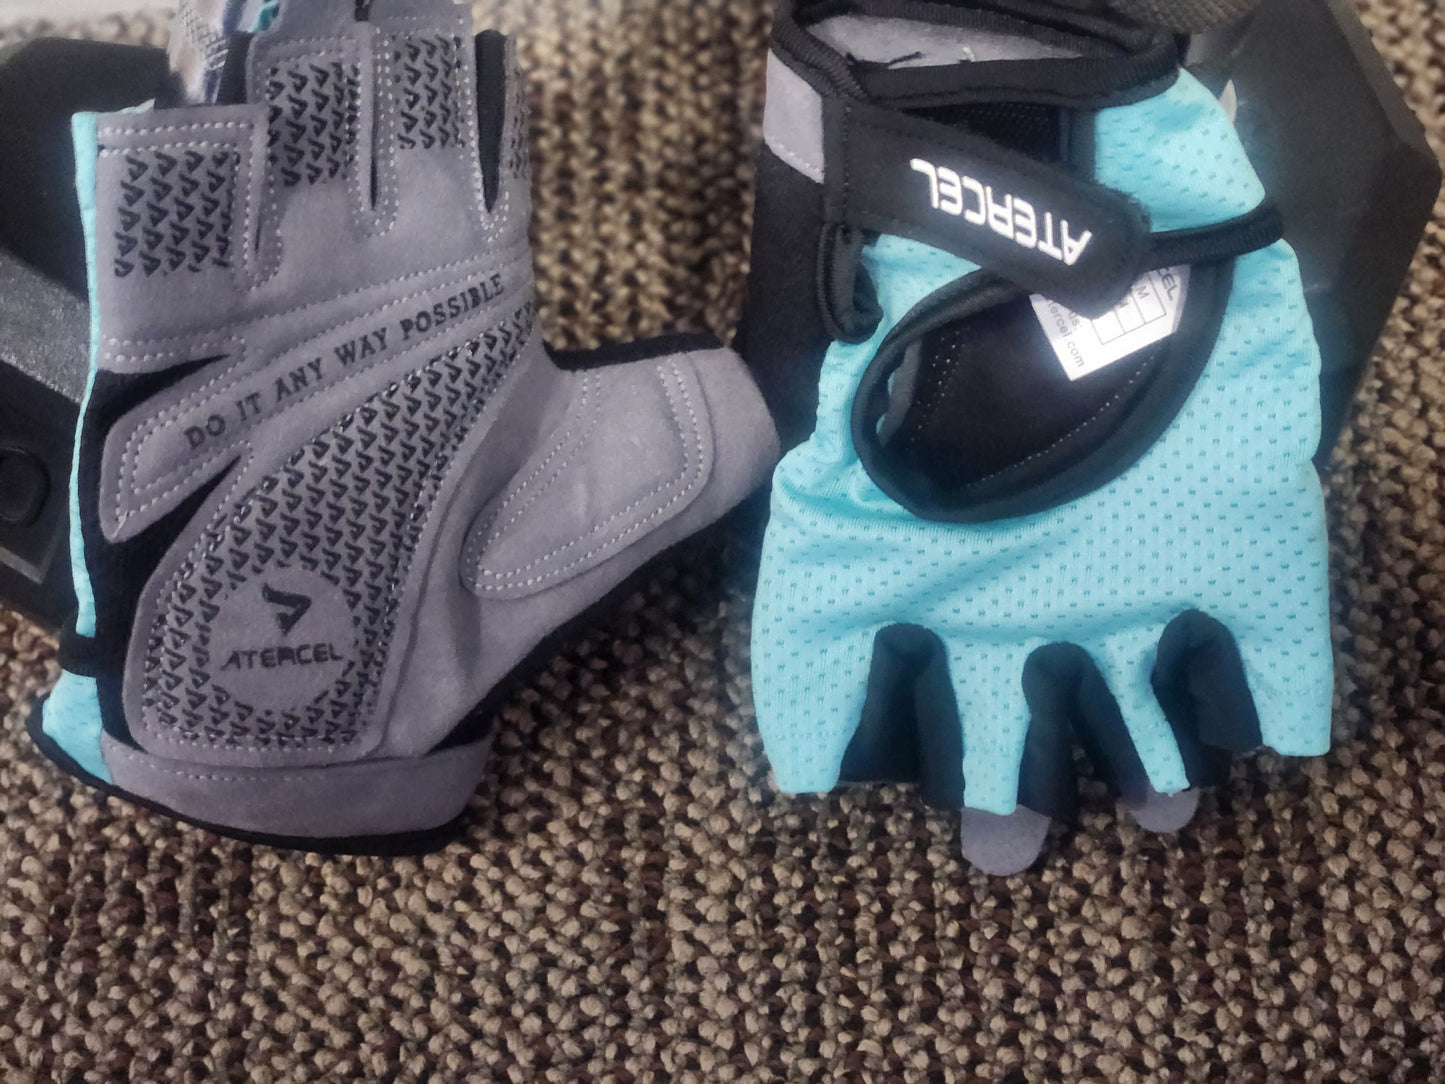 Workout Gloves w/ Full Palm Protection